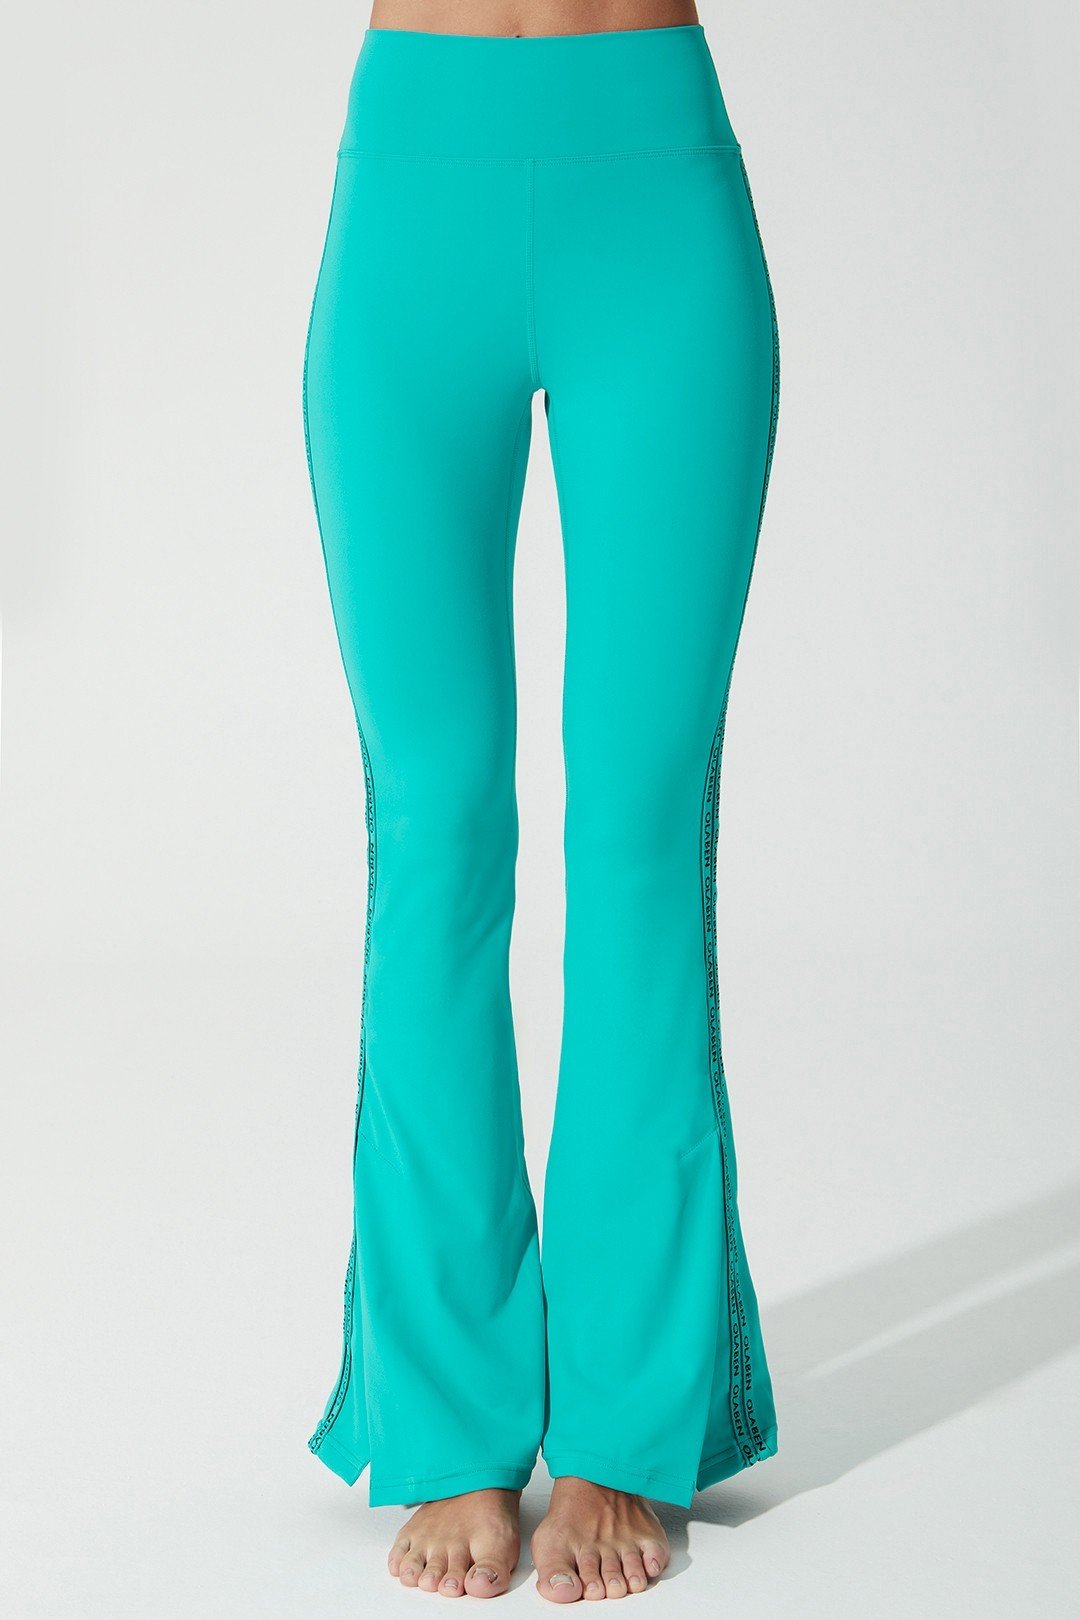 Java green women's leggings with OLABEN YLANG design, perfect for active wear and style.